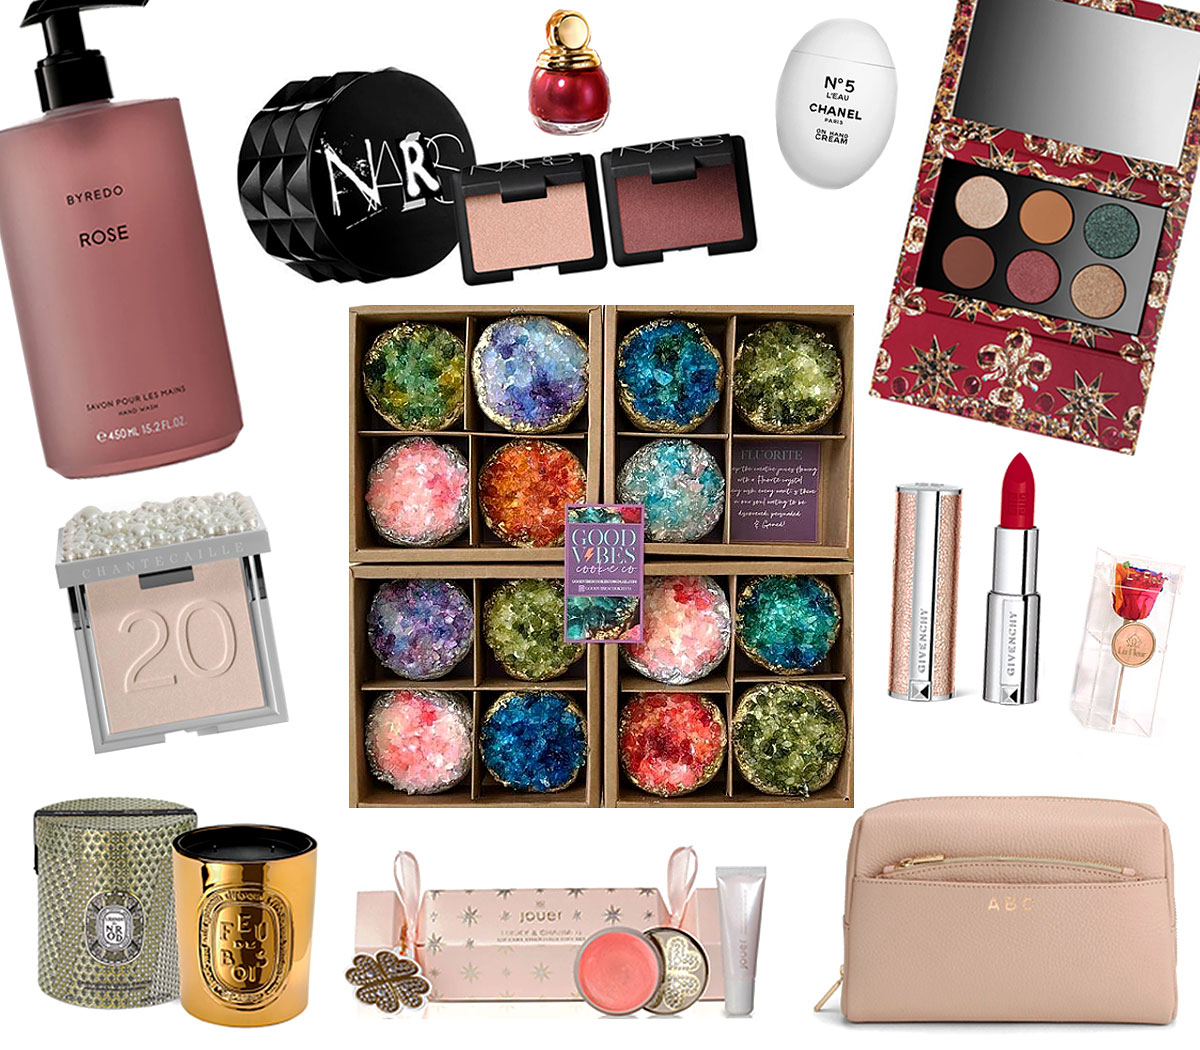 Foolproof Gift Idea: Sephora's Holiday Beauty Sets - The Mom Edit